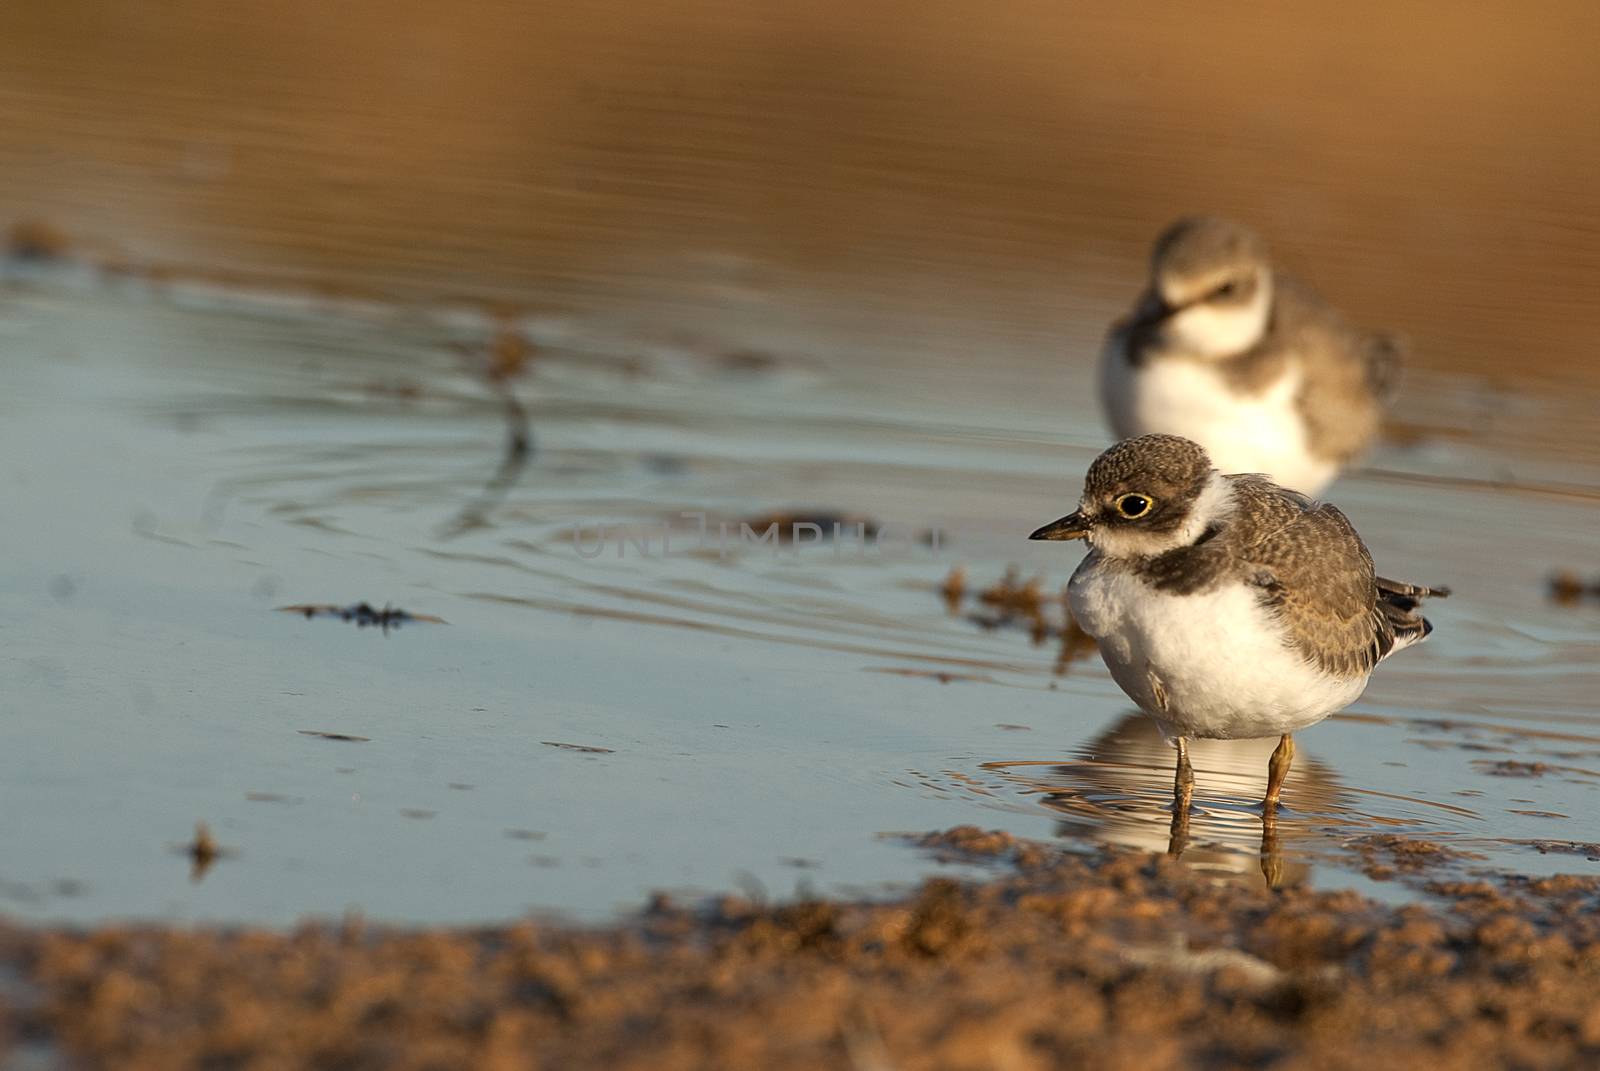 Little Ringed Plover (Charadrius dubius), Looking for food in water and mud